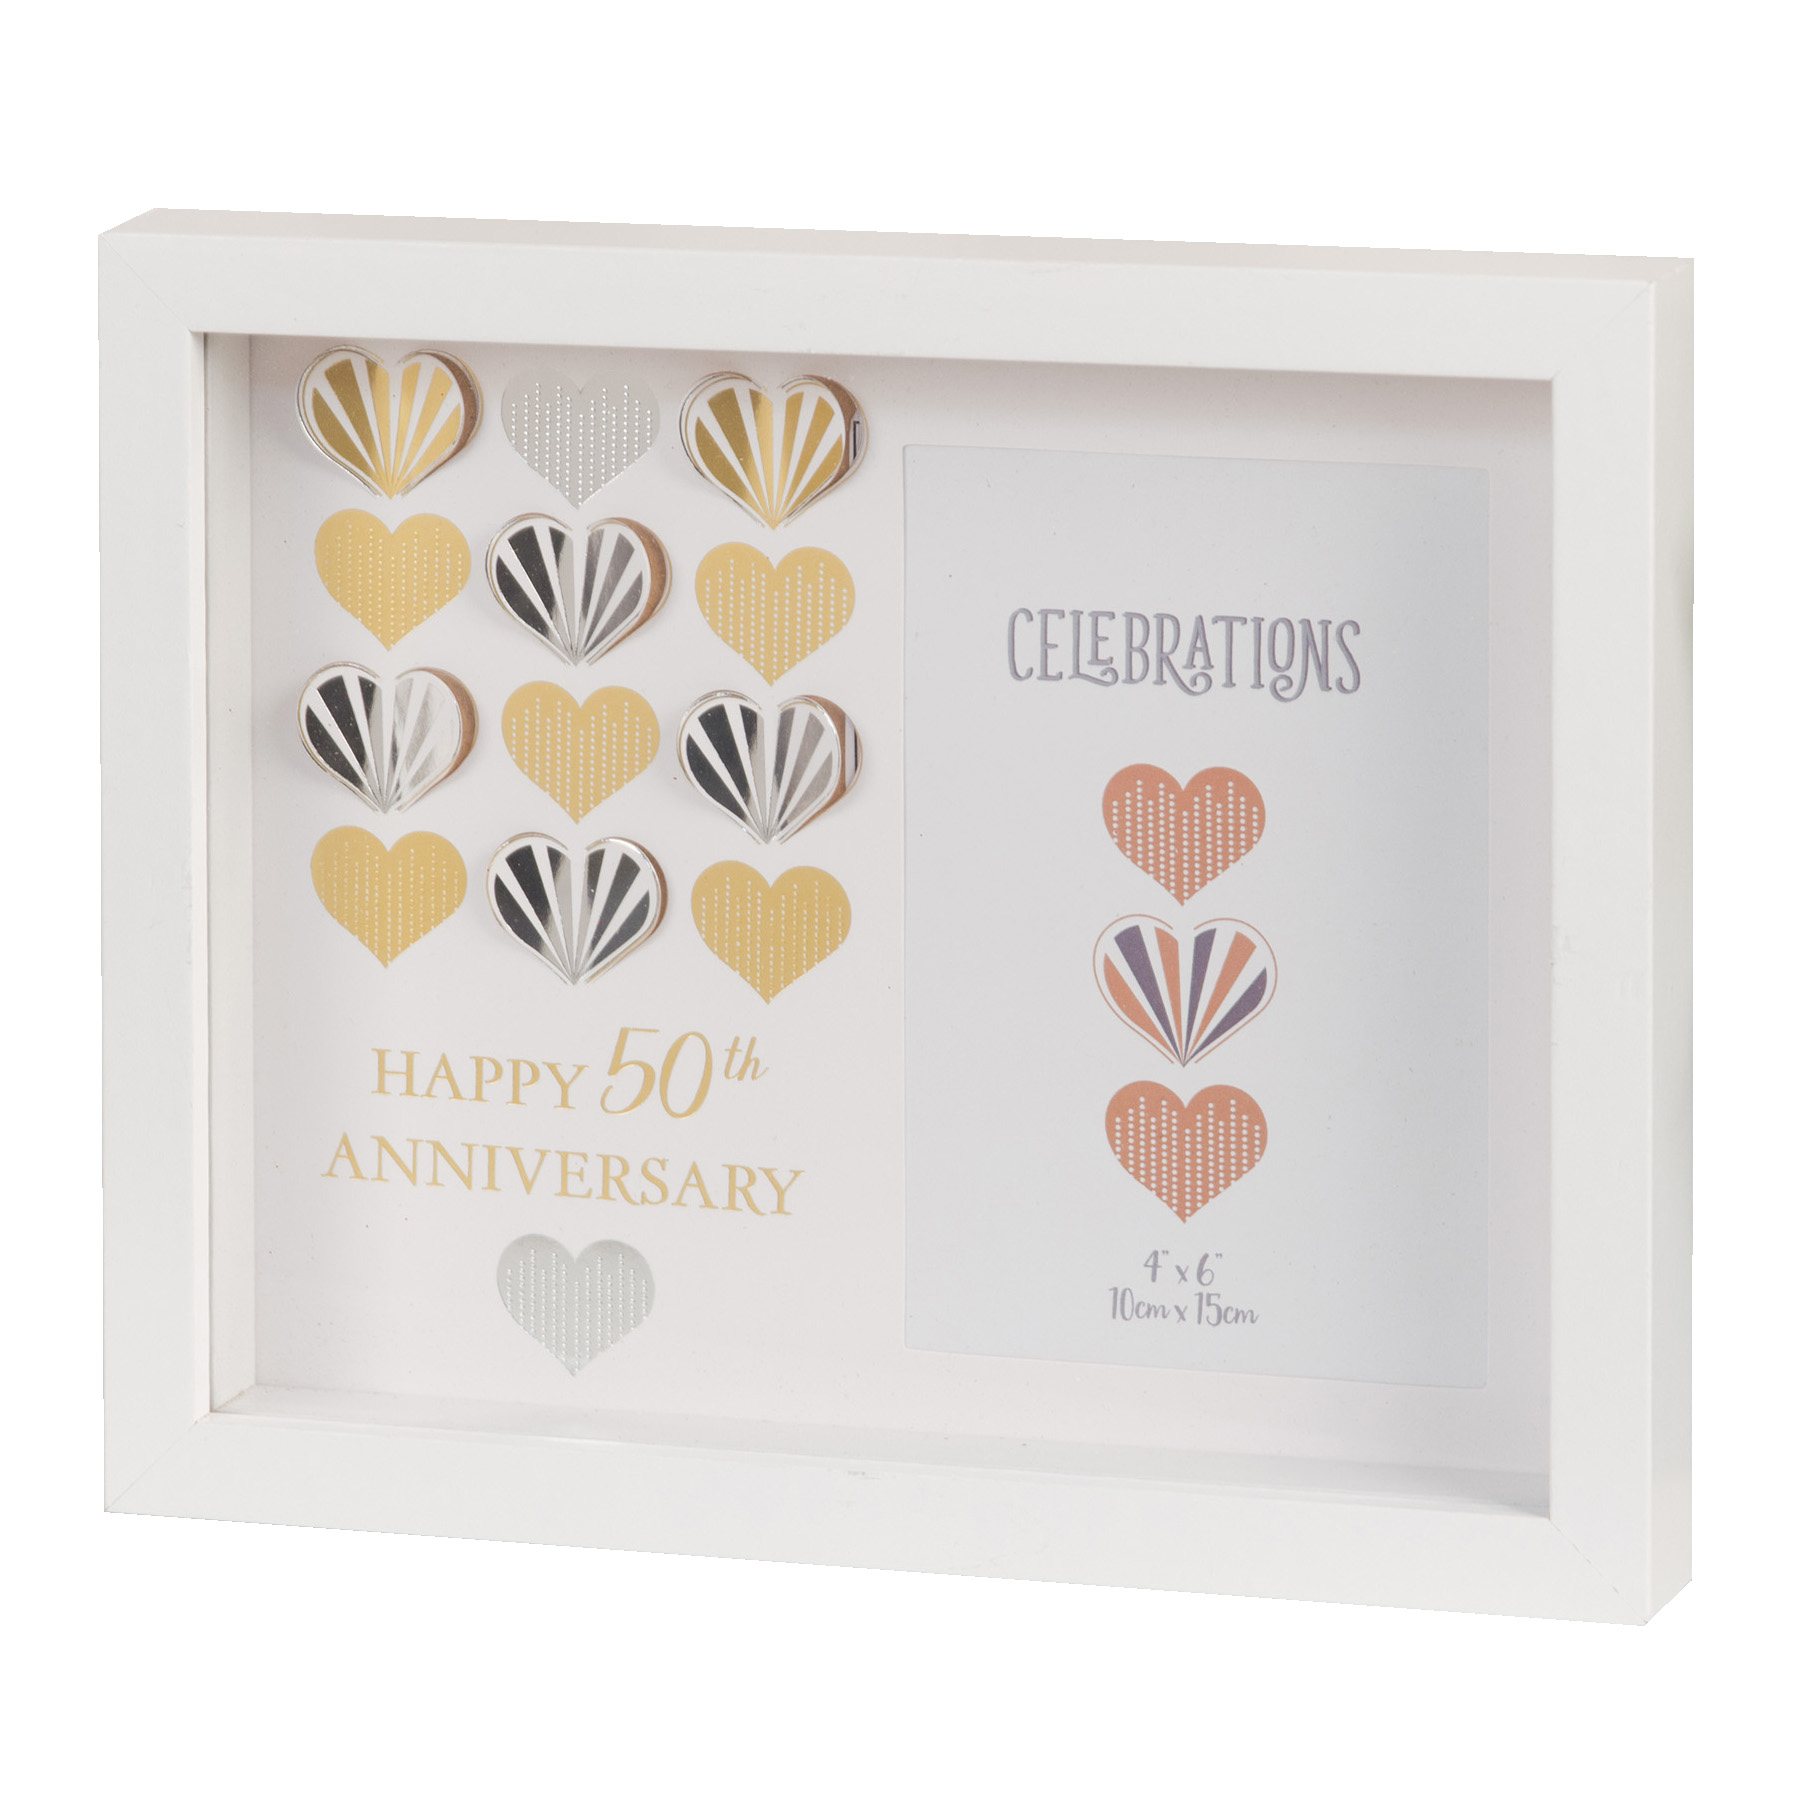 Celebrations White MDF Wall 4'x6' Frame Plaque - 50th Golden Anniversary